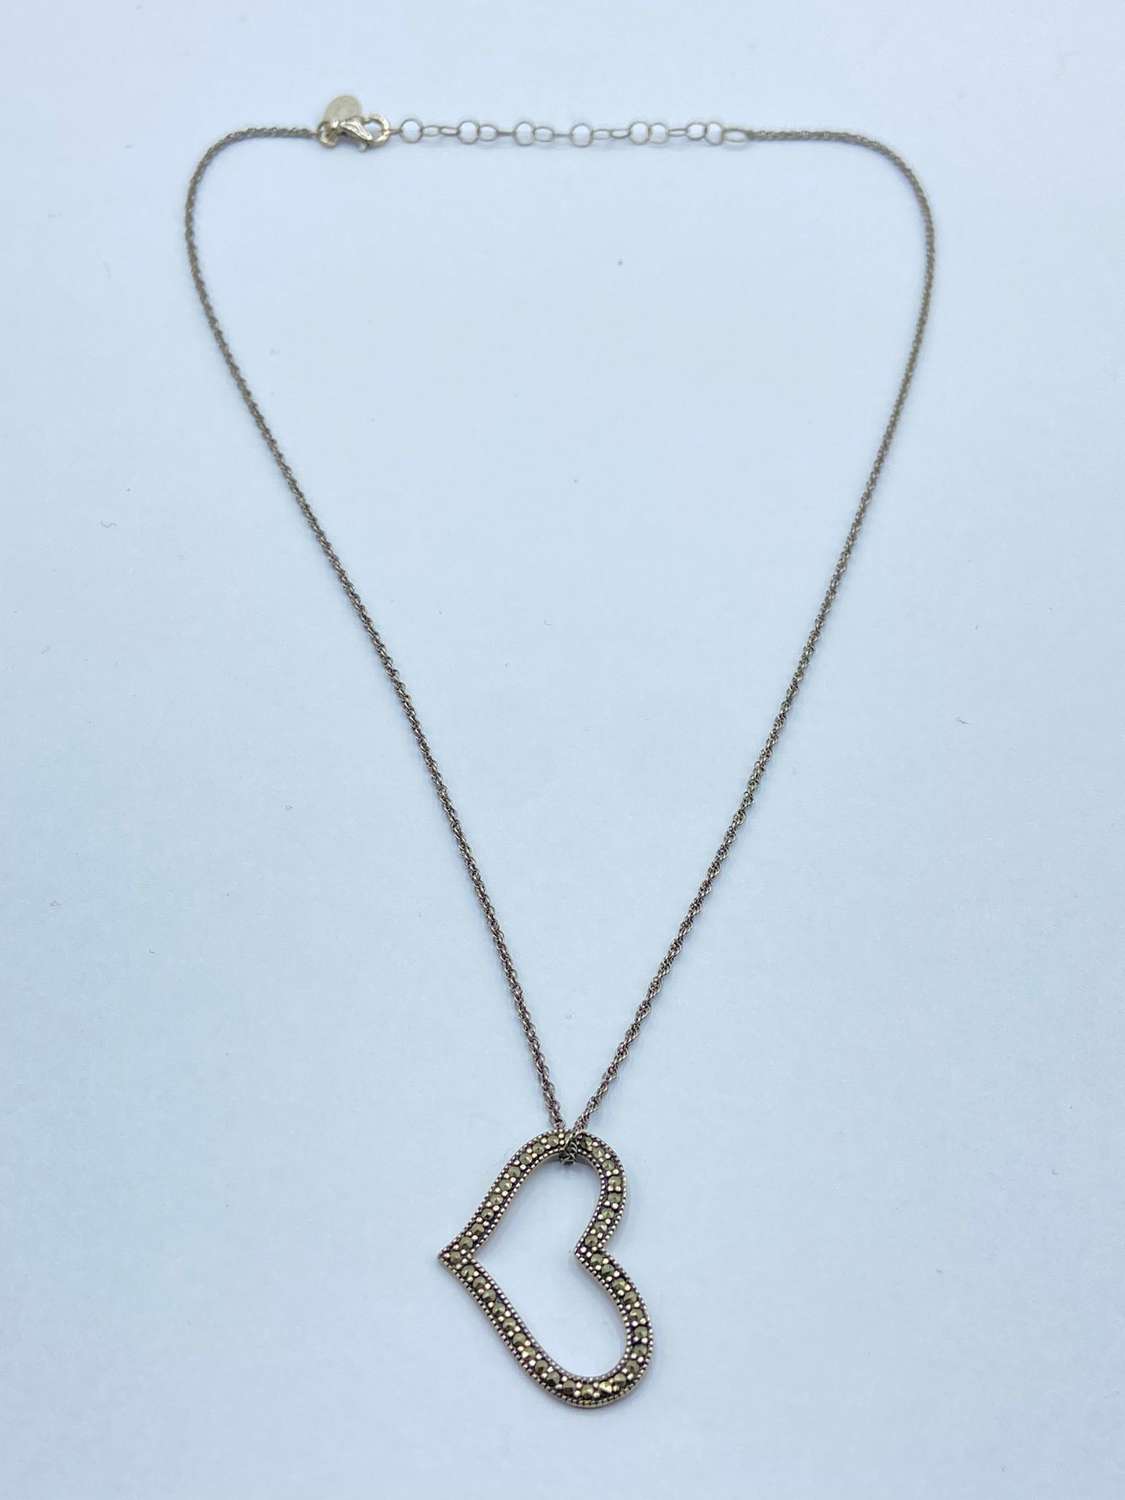 Beautiful Sterling Silver & Marcasite Heart Necklace By Oliver Bonas